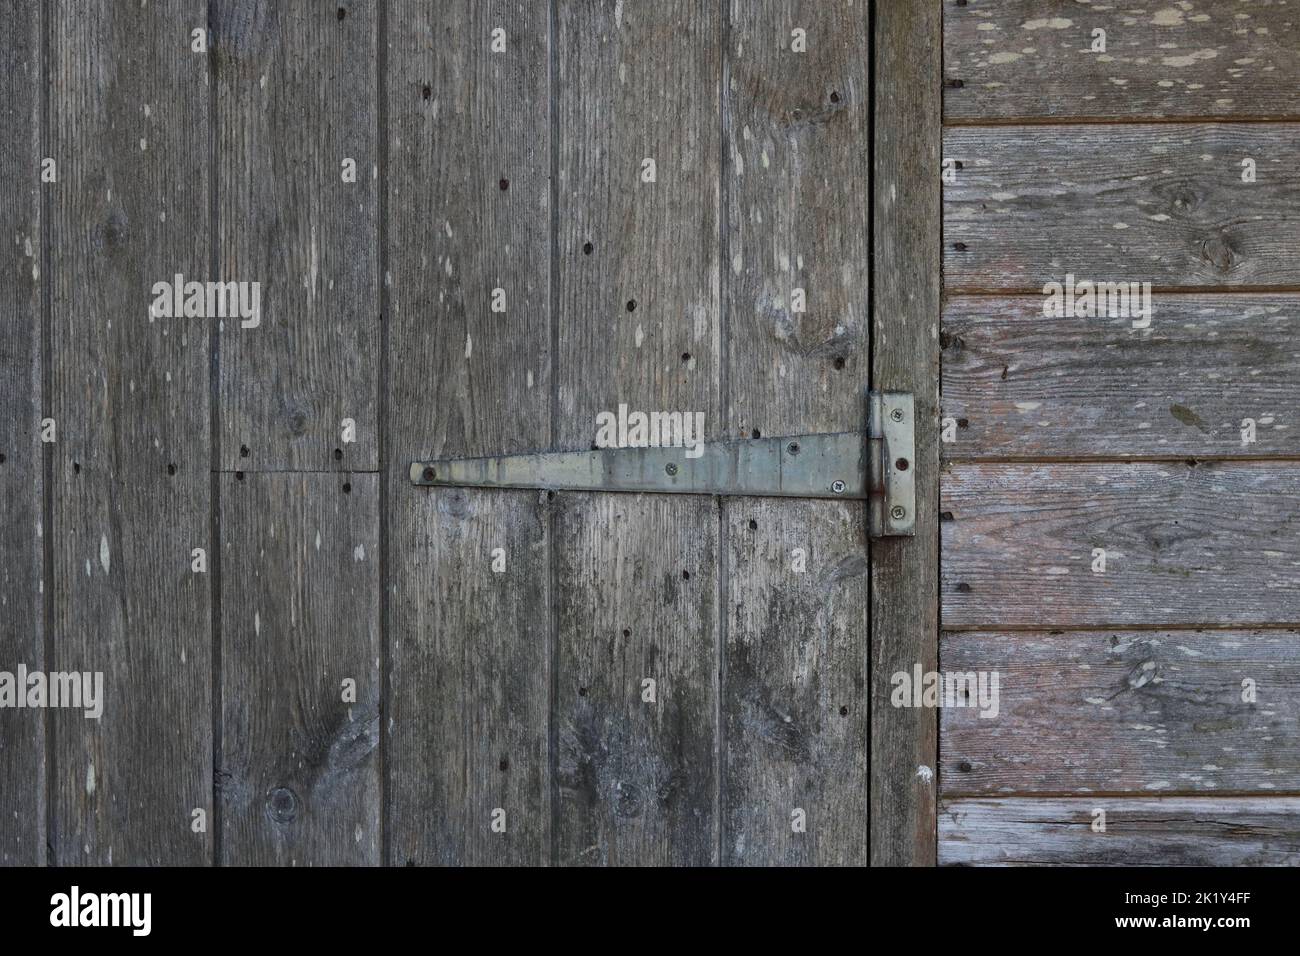 Exterior of old weathered wooden shed showing door and hinge detail Stock Photo